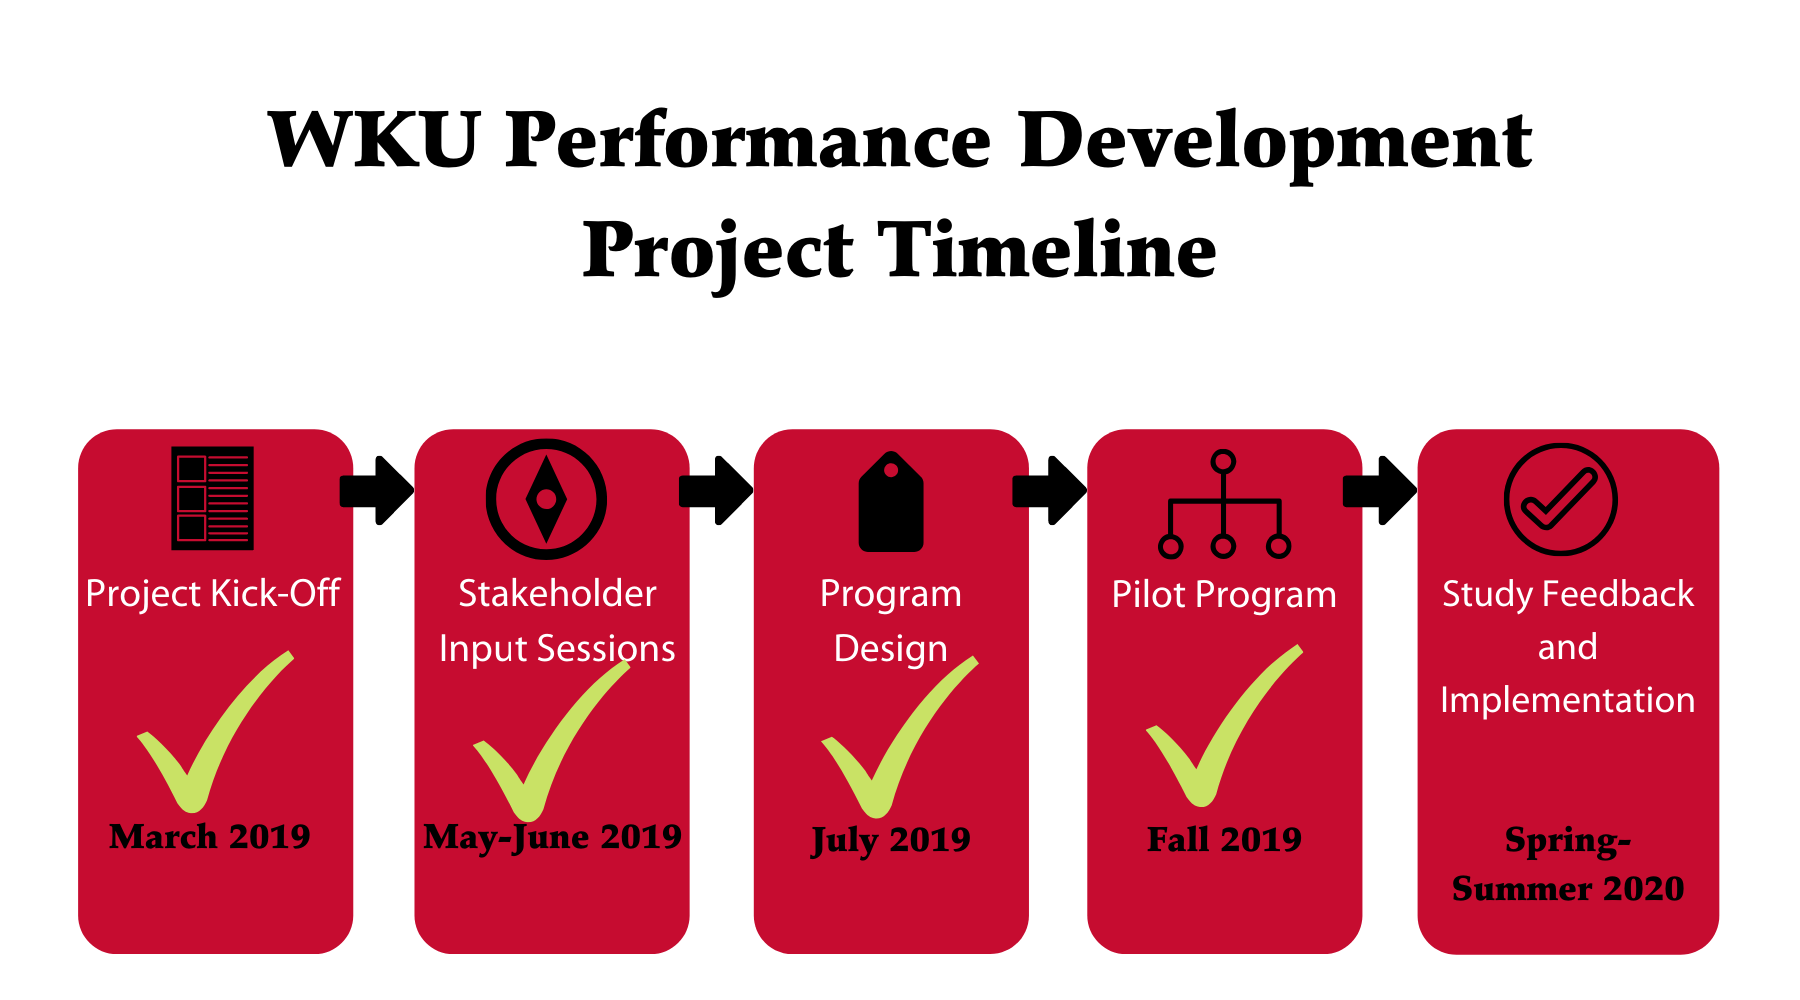 PD Timeline for January 2020